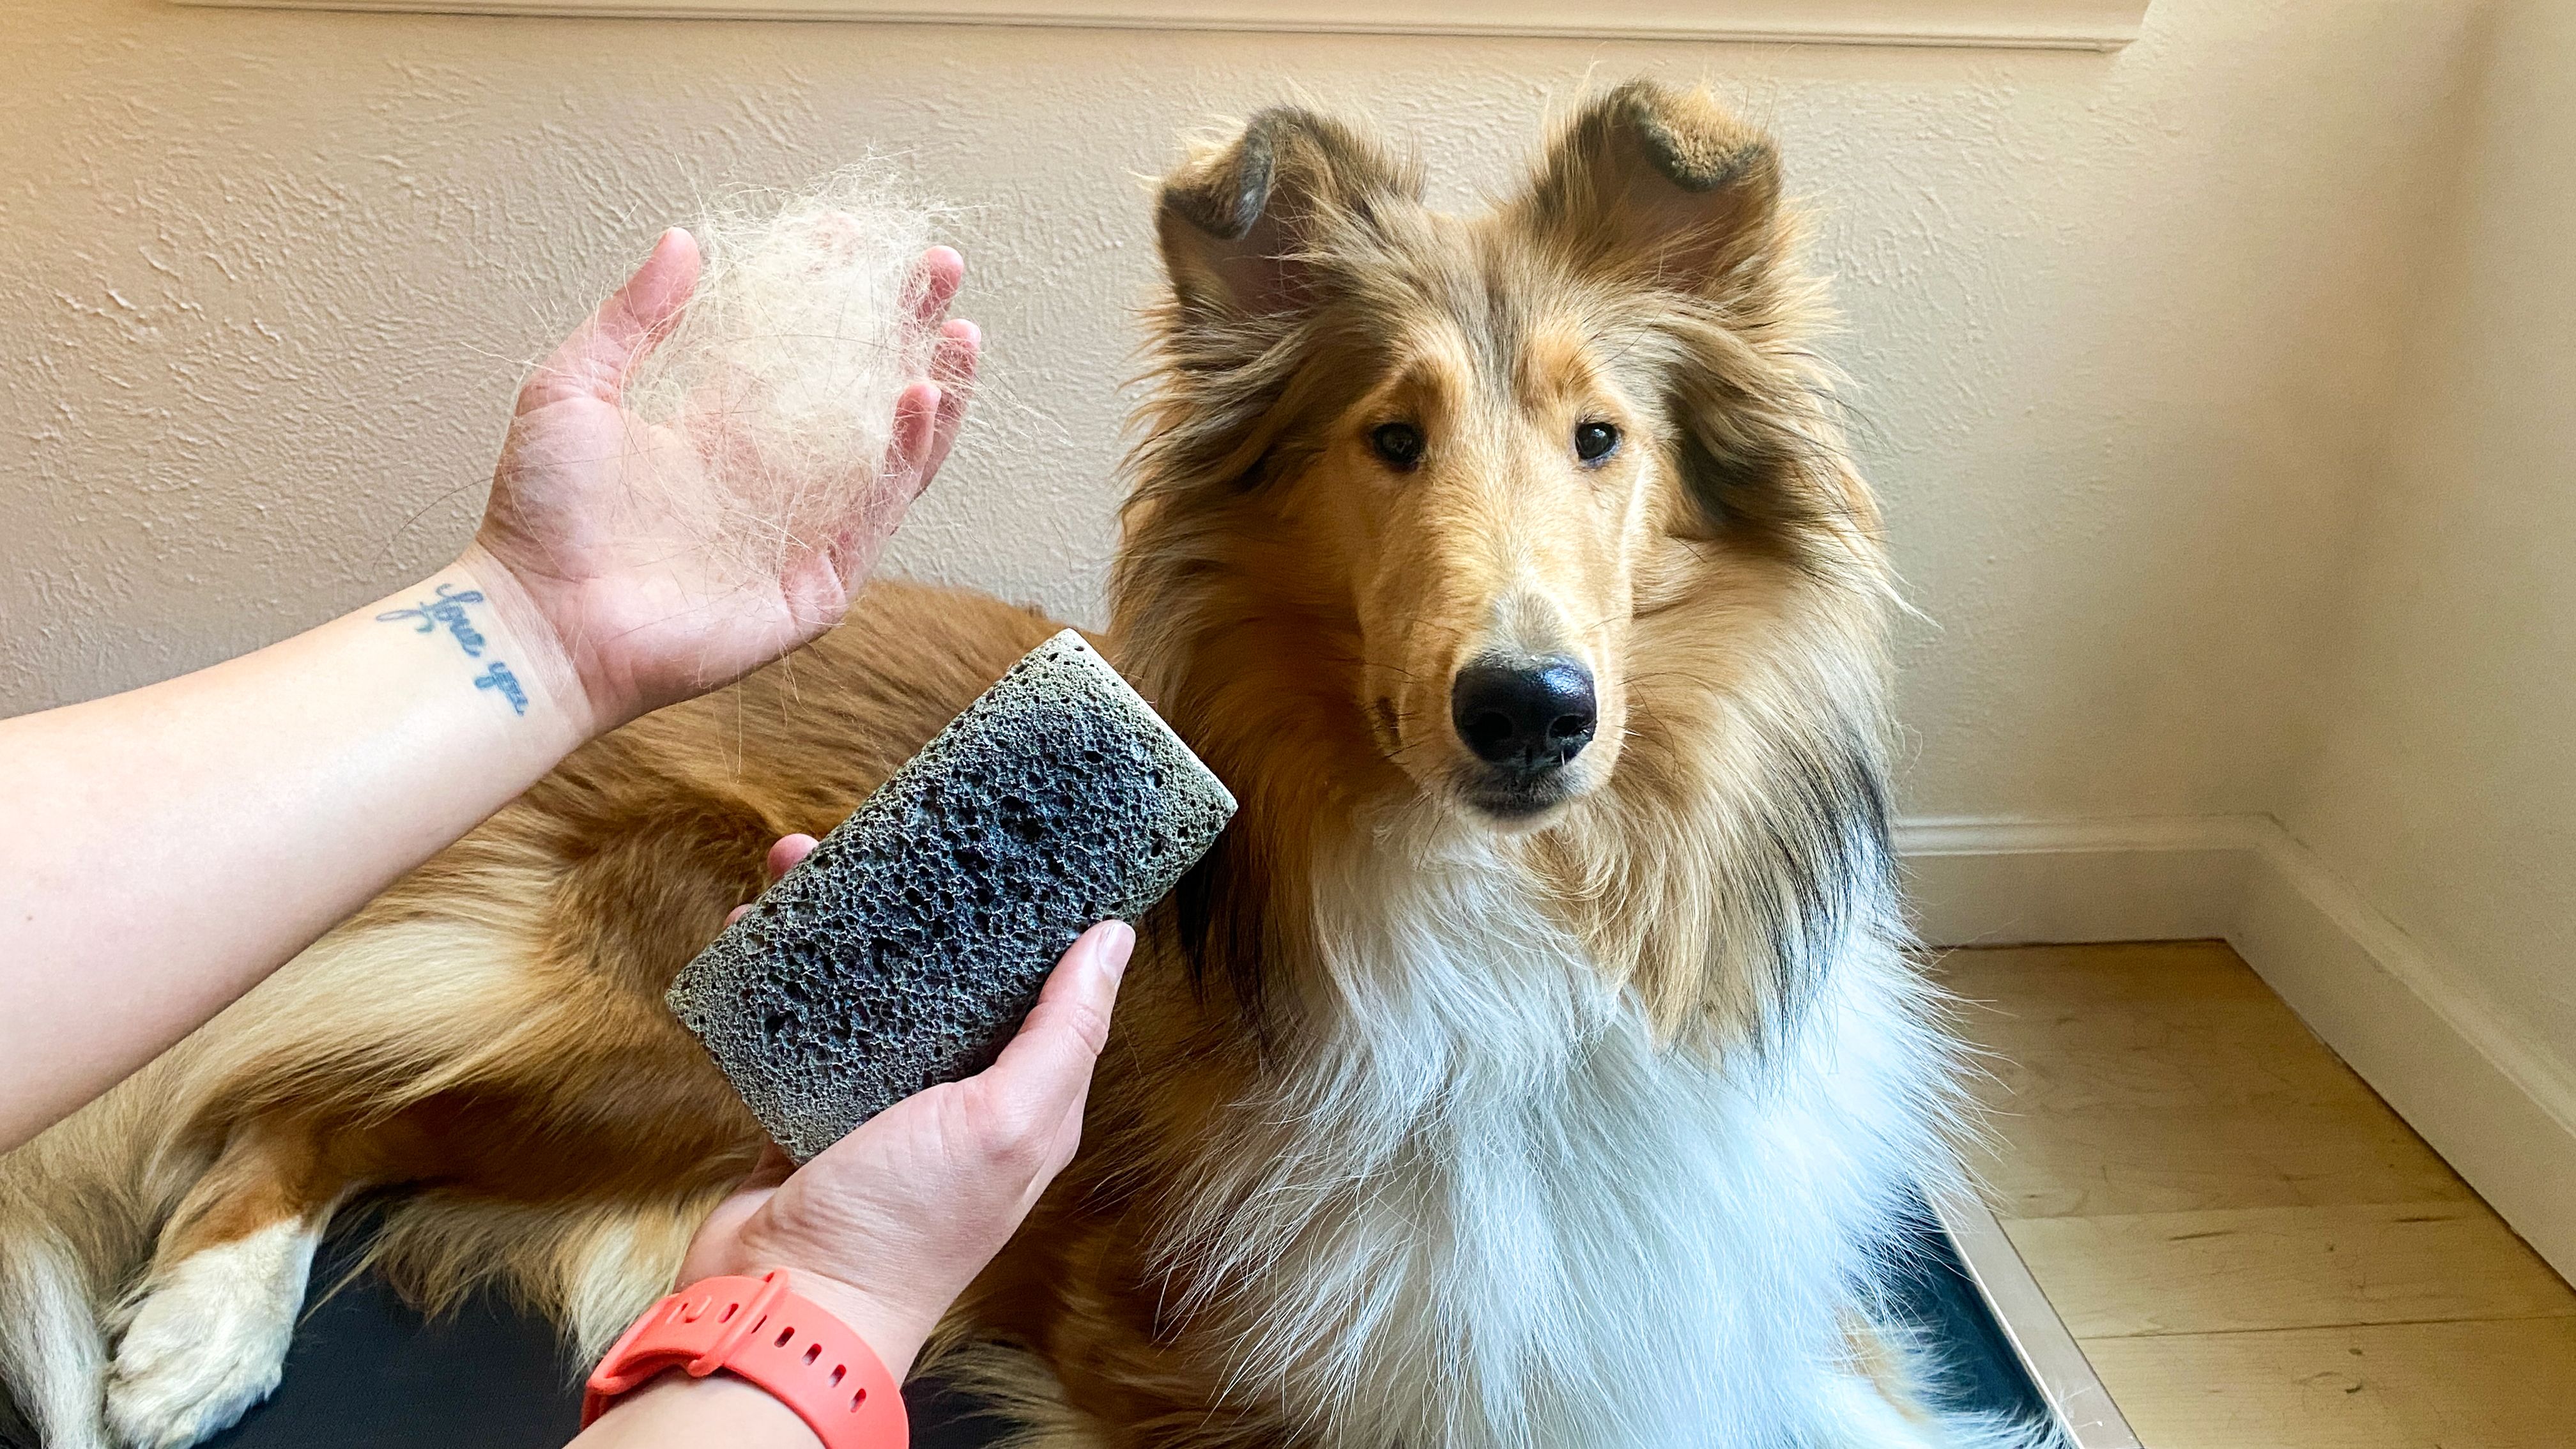 Groomer's Stone Pet Grooming Tool review